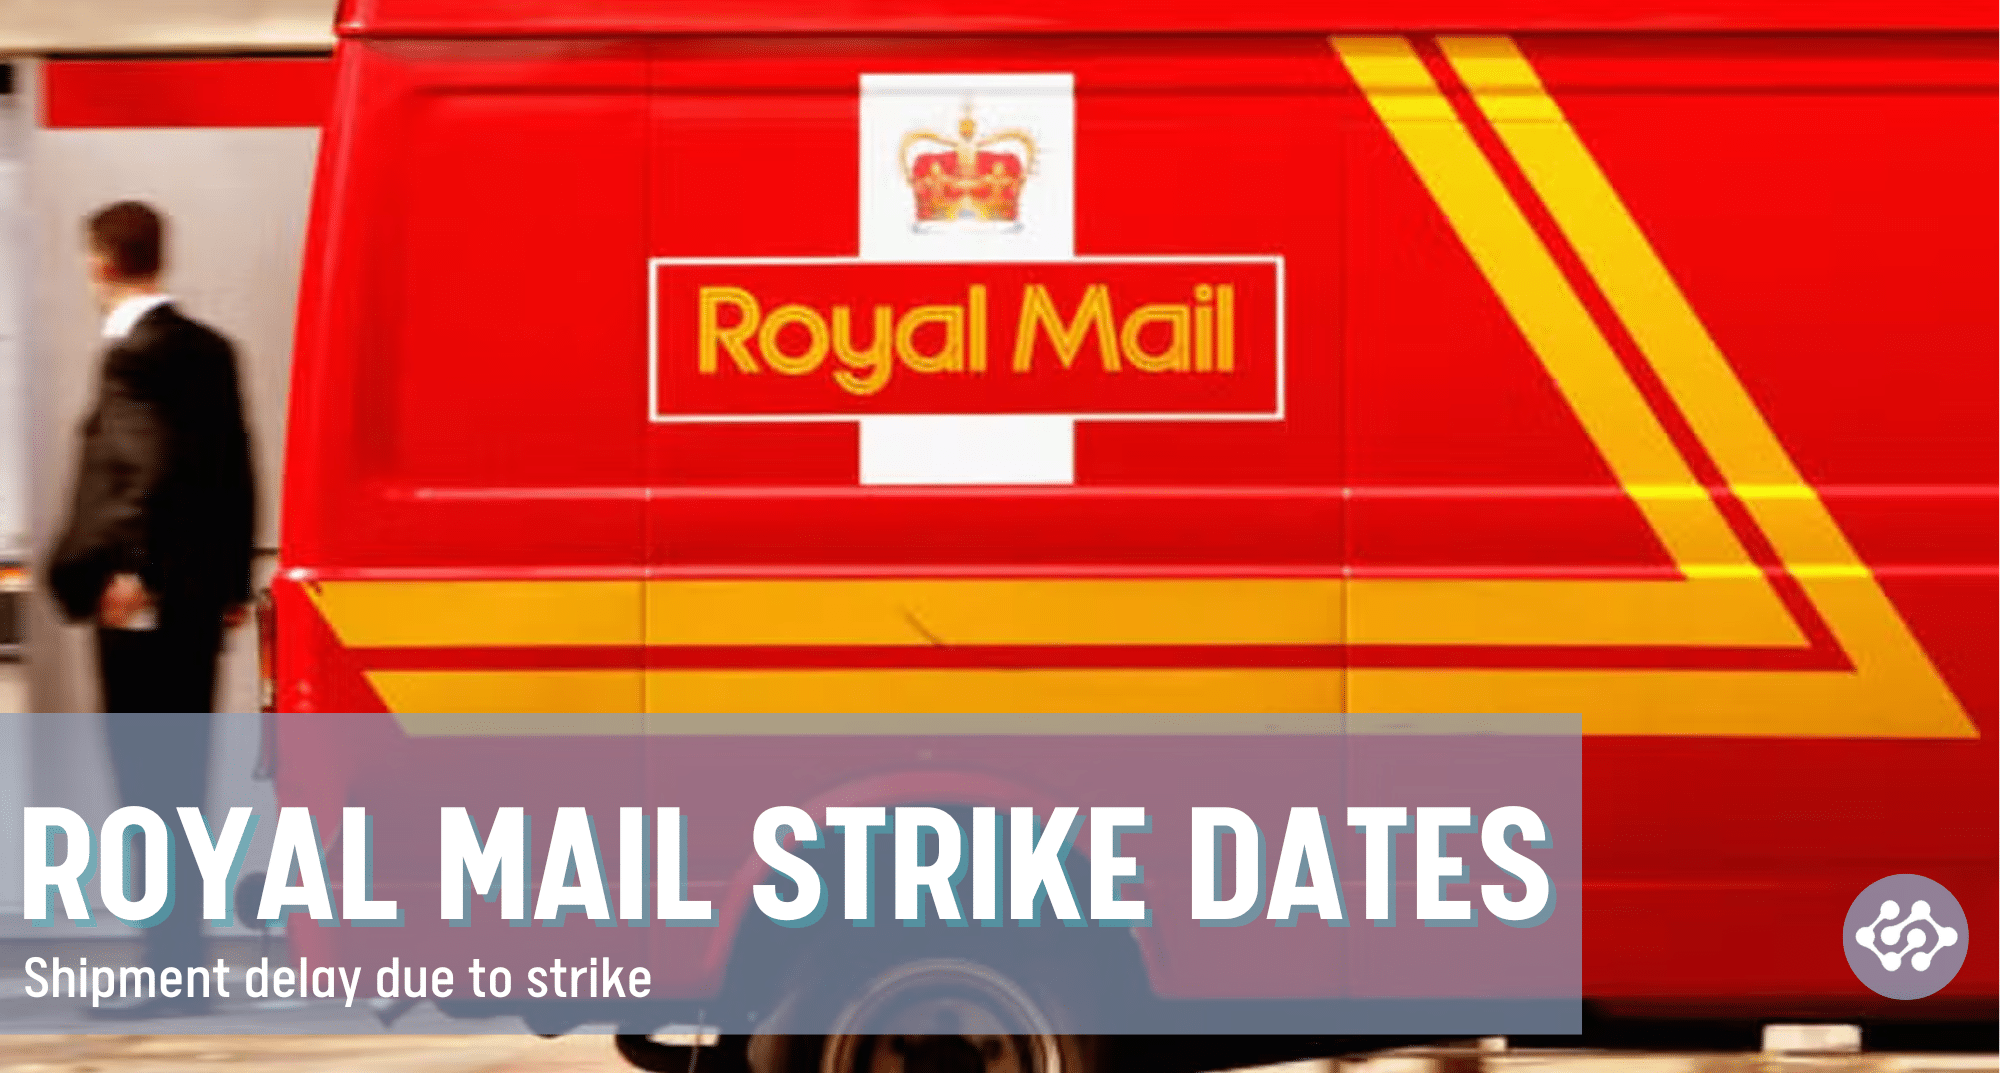 DELAY IN DELIVERY DUE TO ROYAL MAIL STRIKE